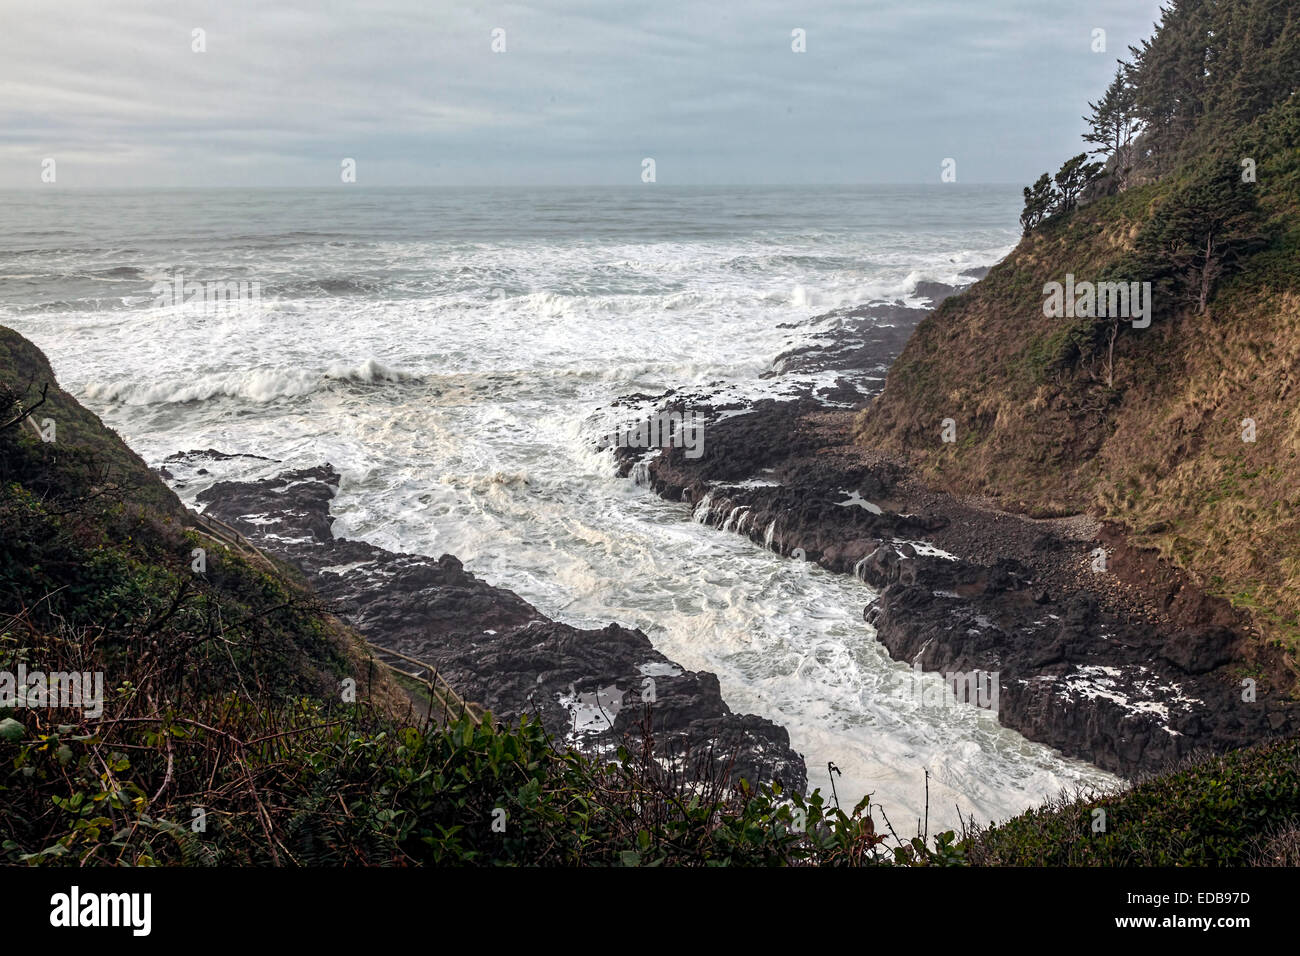 Stormy seas pound into the Devil's Churn and Cape Perpetua' coastline south of Yachats along the scenic Oregon Coast Highway. Stock Photo